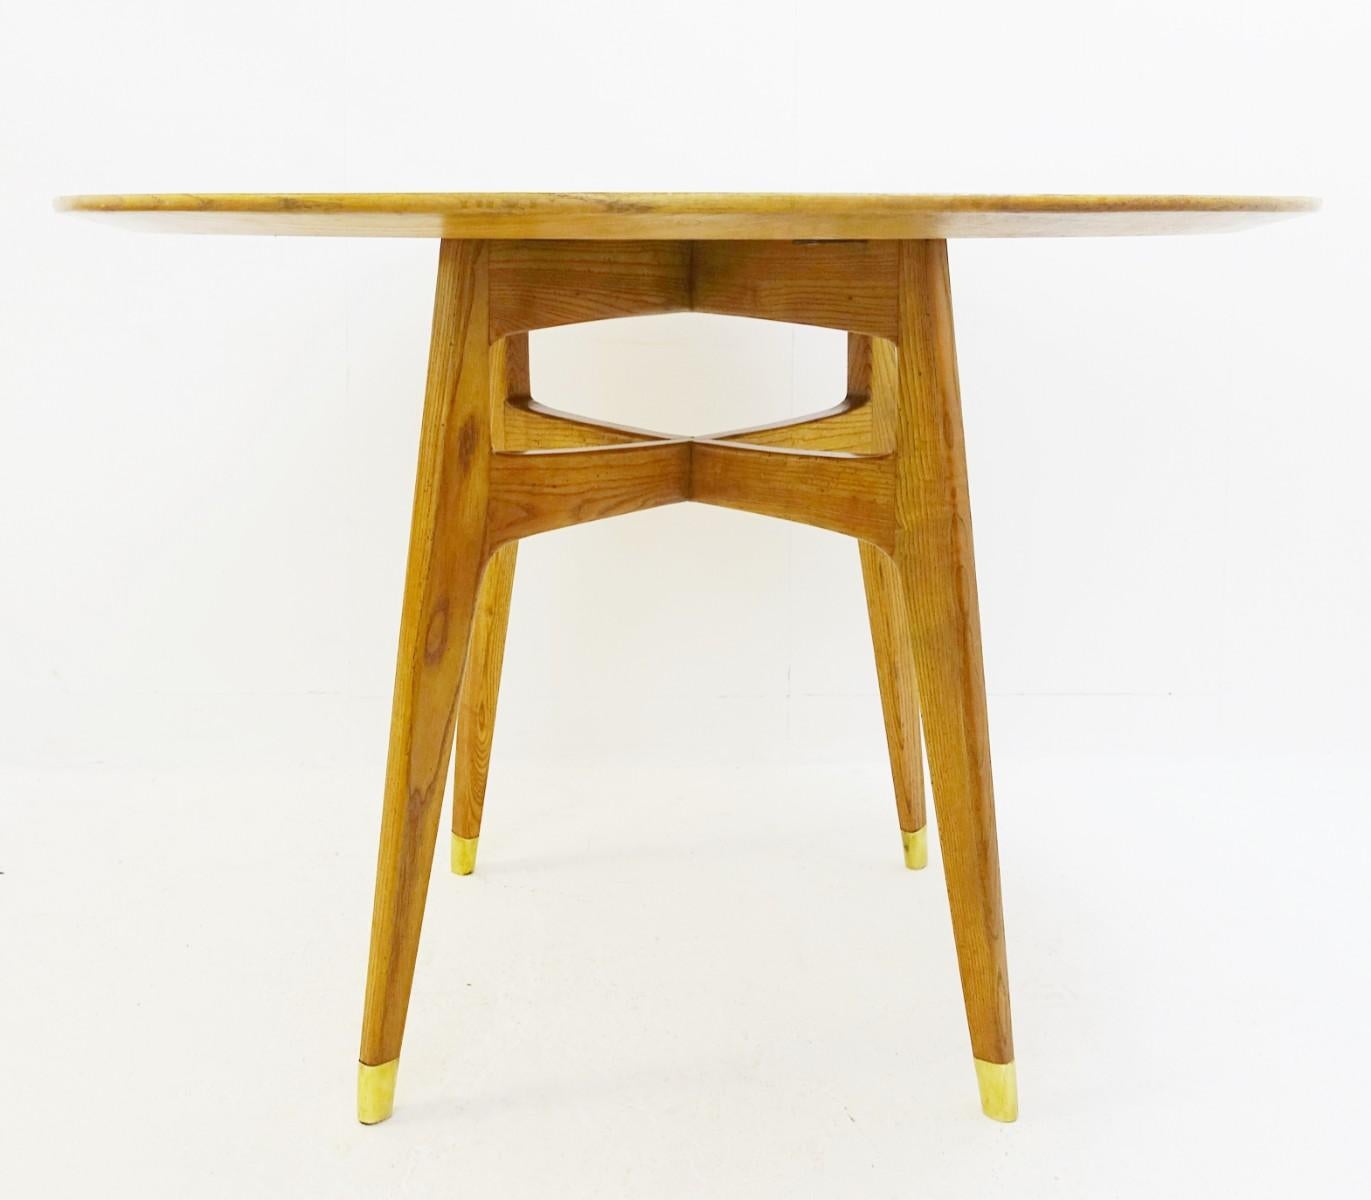 Rond dinning table by Gio Ponti, Italy, 1950s.